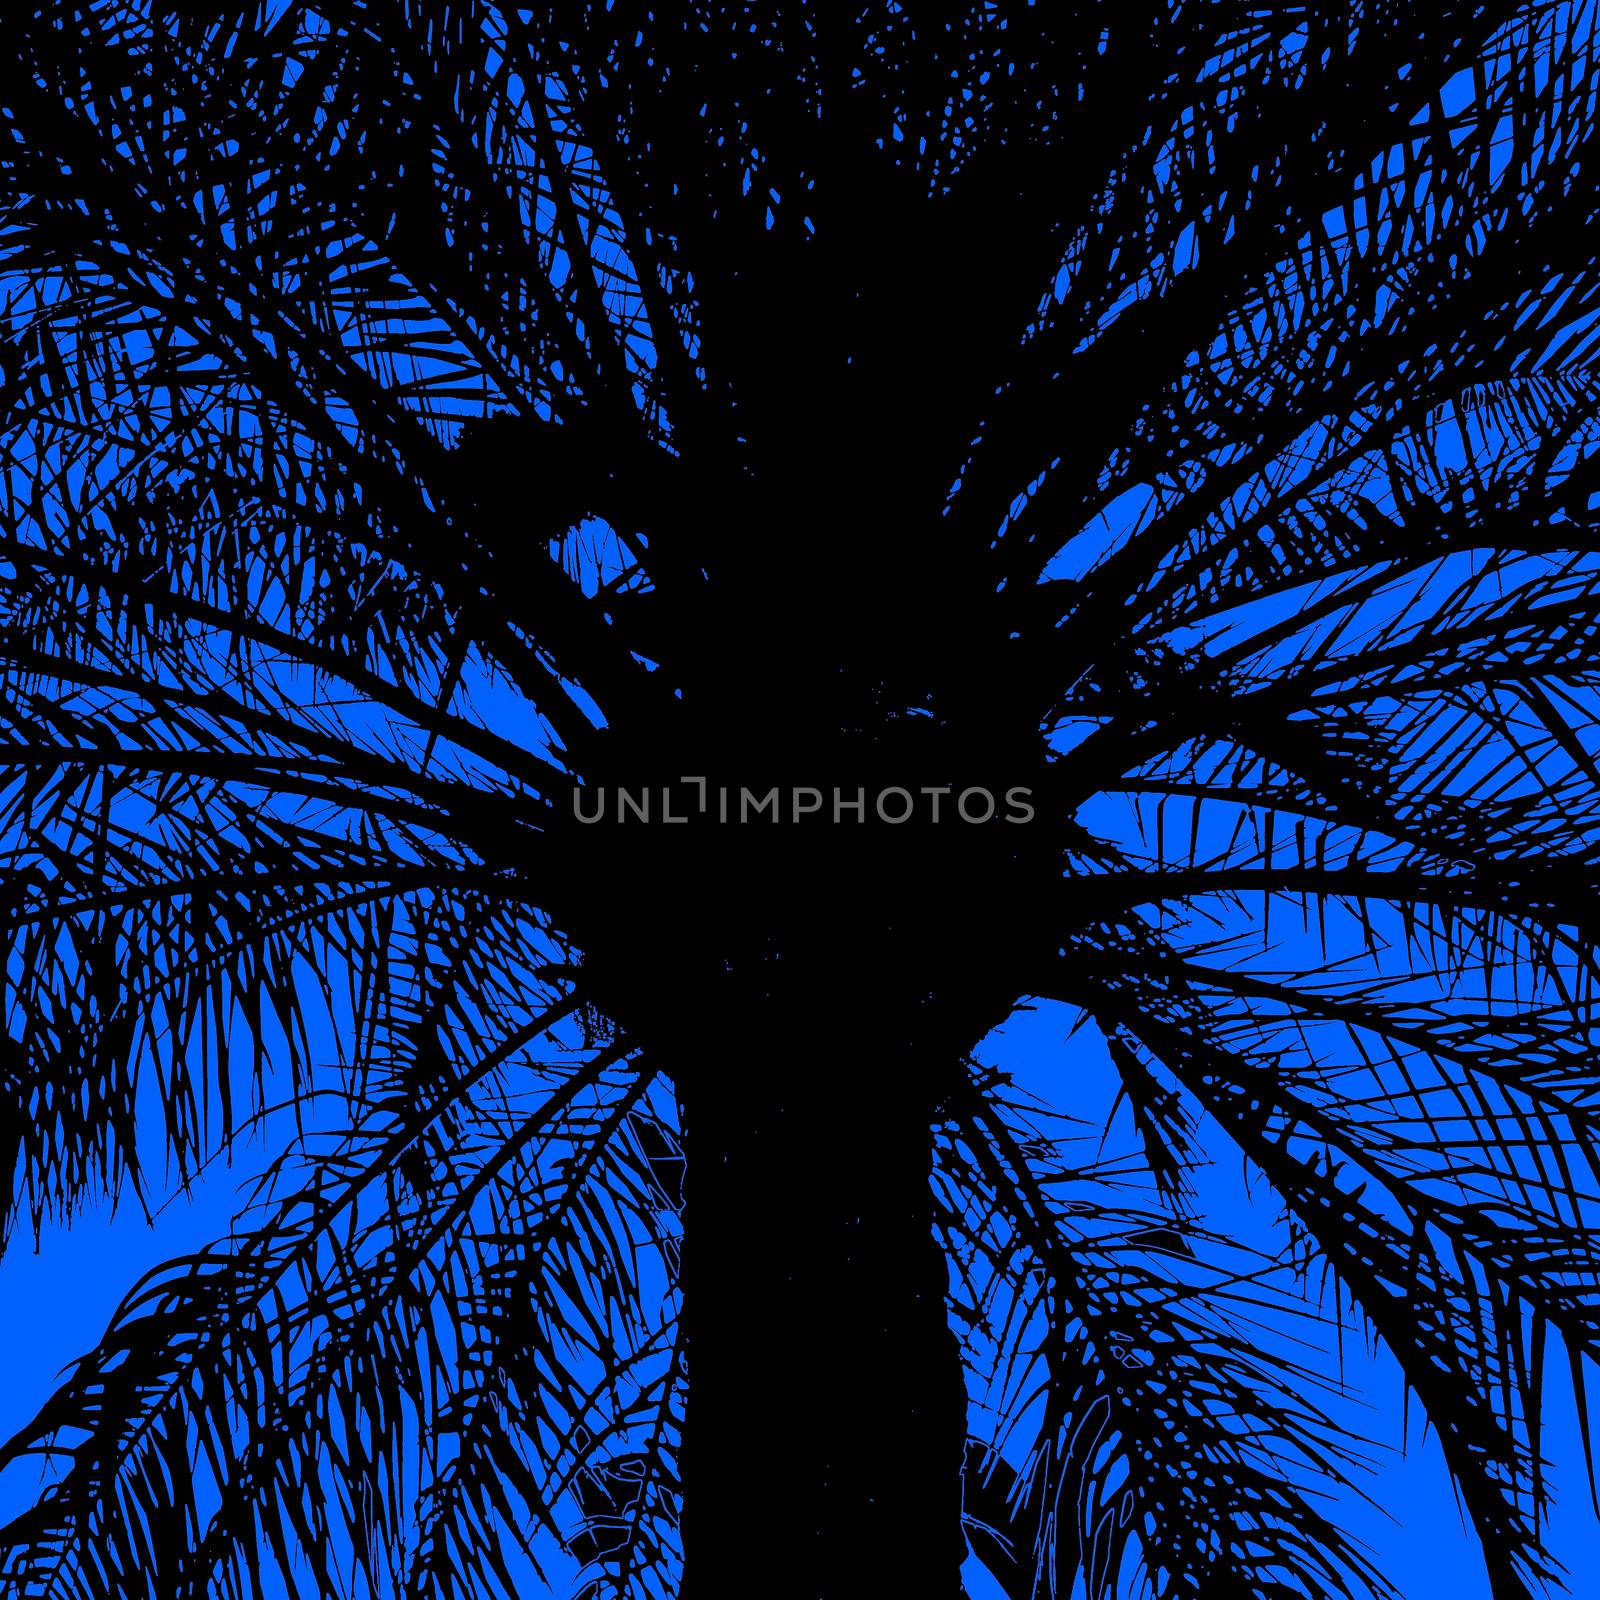 Abstract black silhouette of a large palm tree in the back light, with dark blue background, photographed on the beach of Aqaba, Jordan by geogif